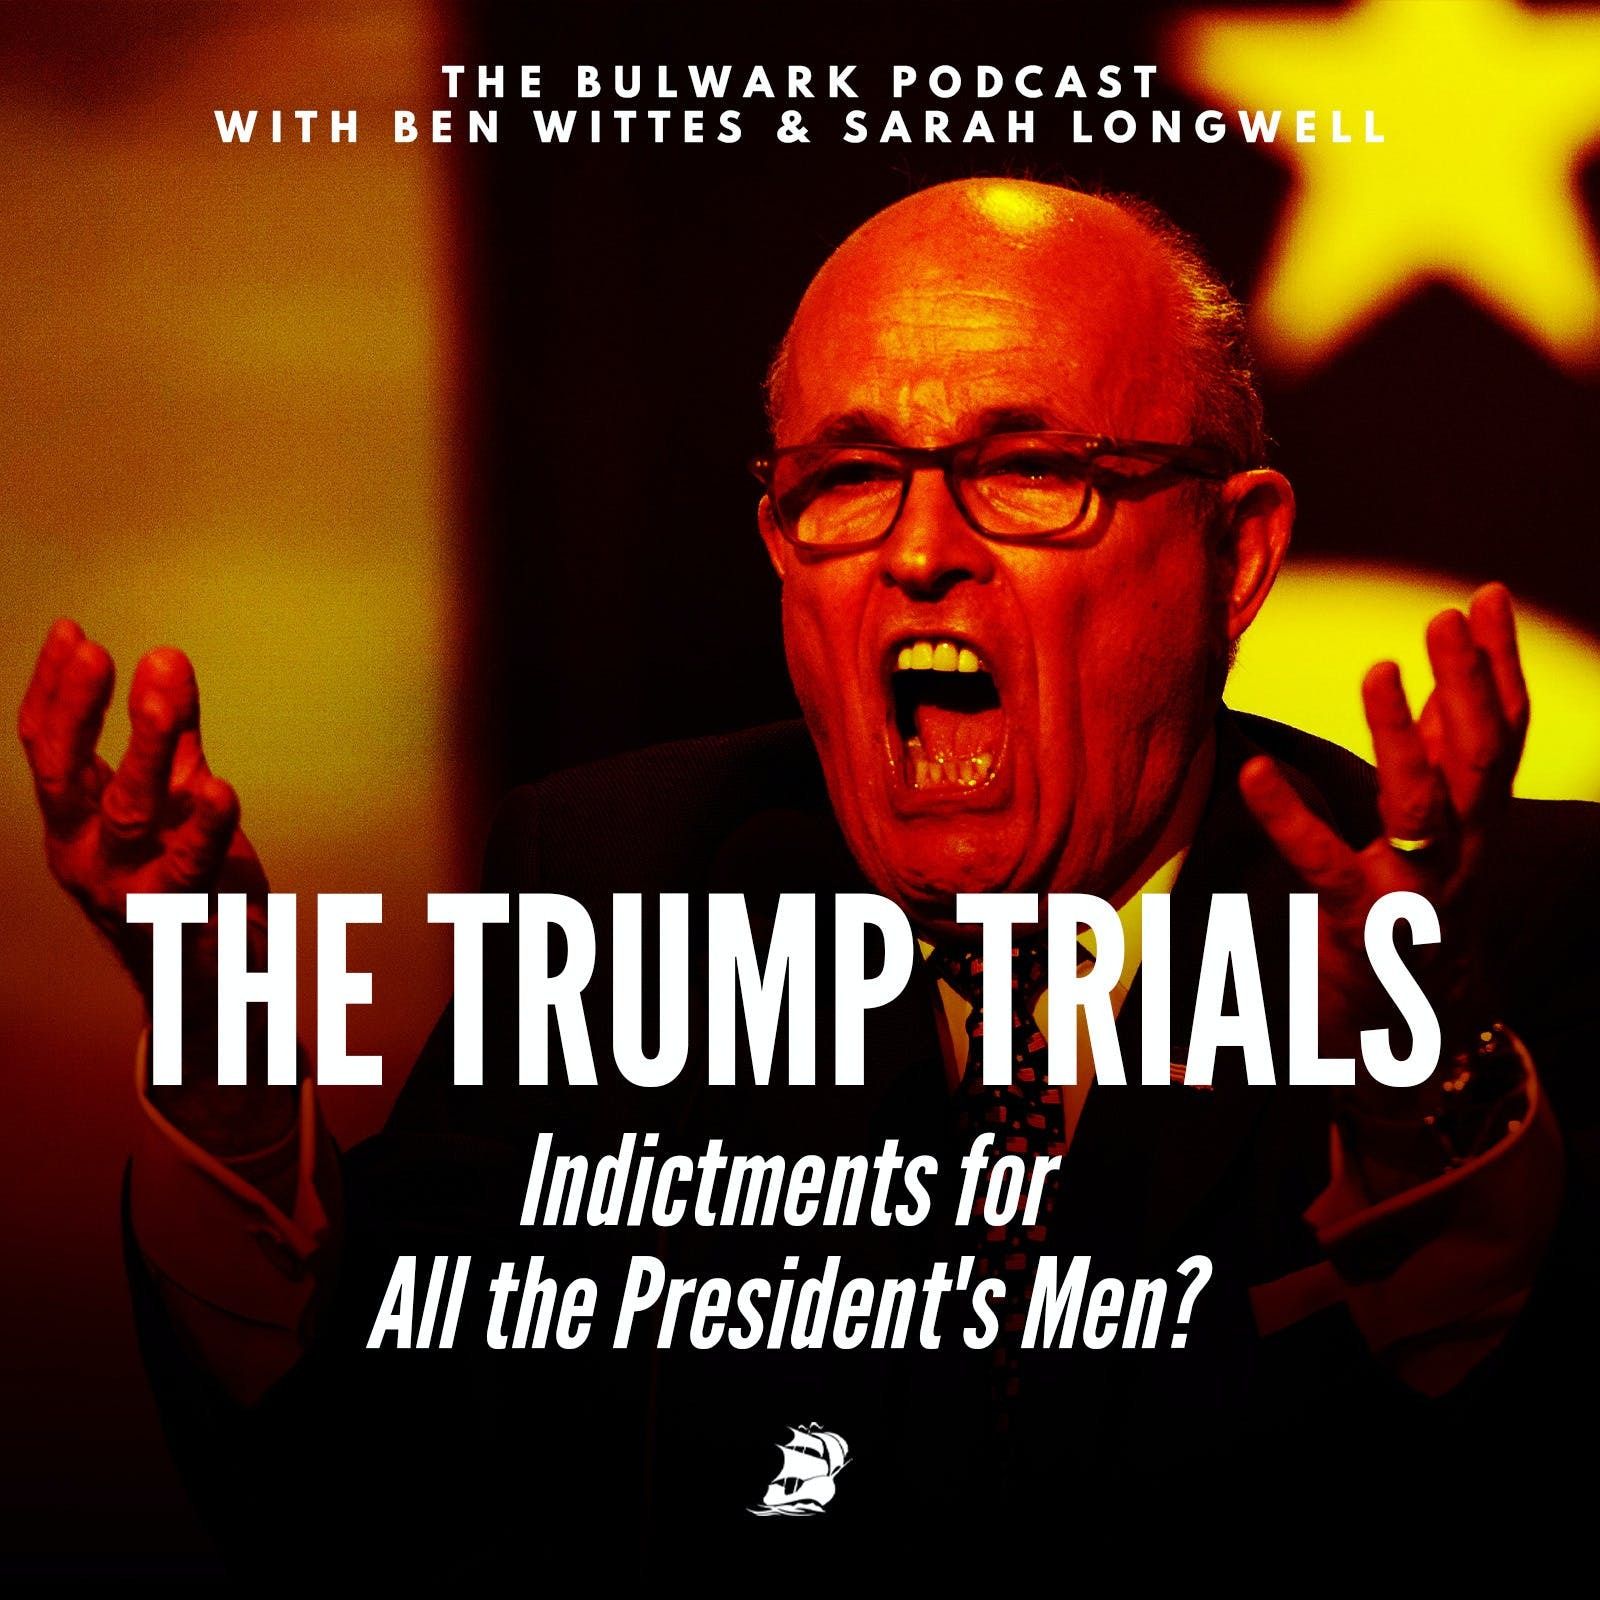 Indictments for All the President's Men? by The Bulwark Podcast